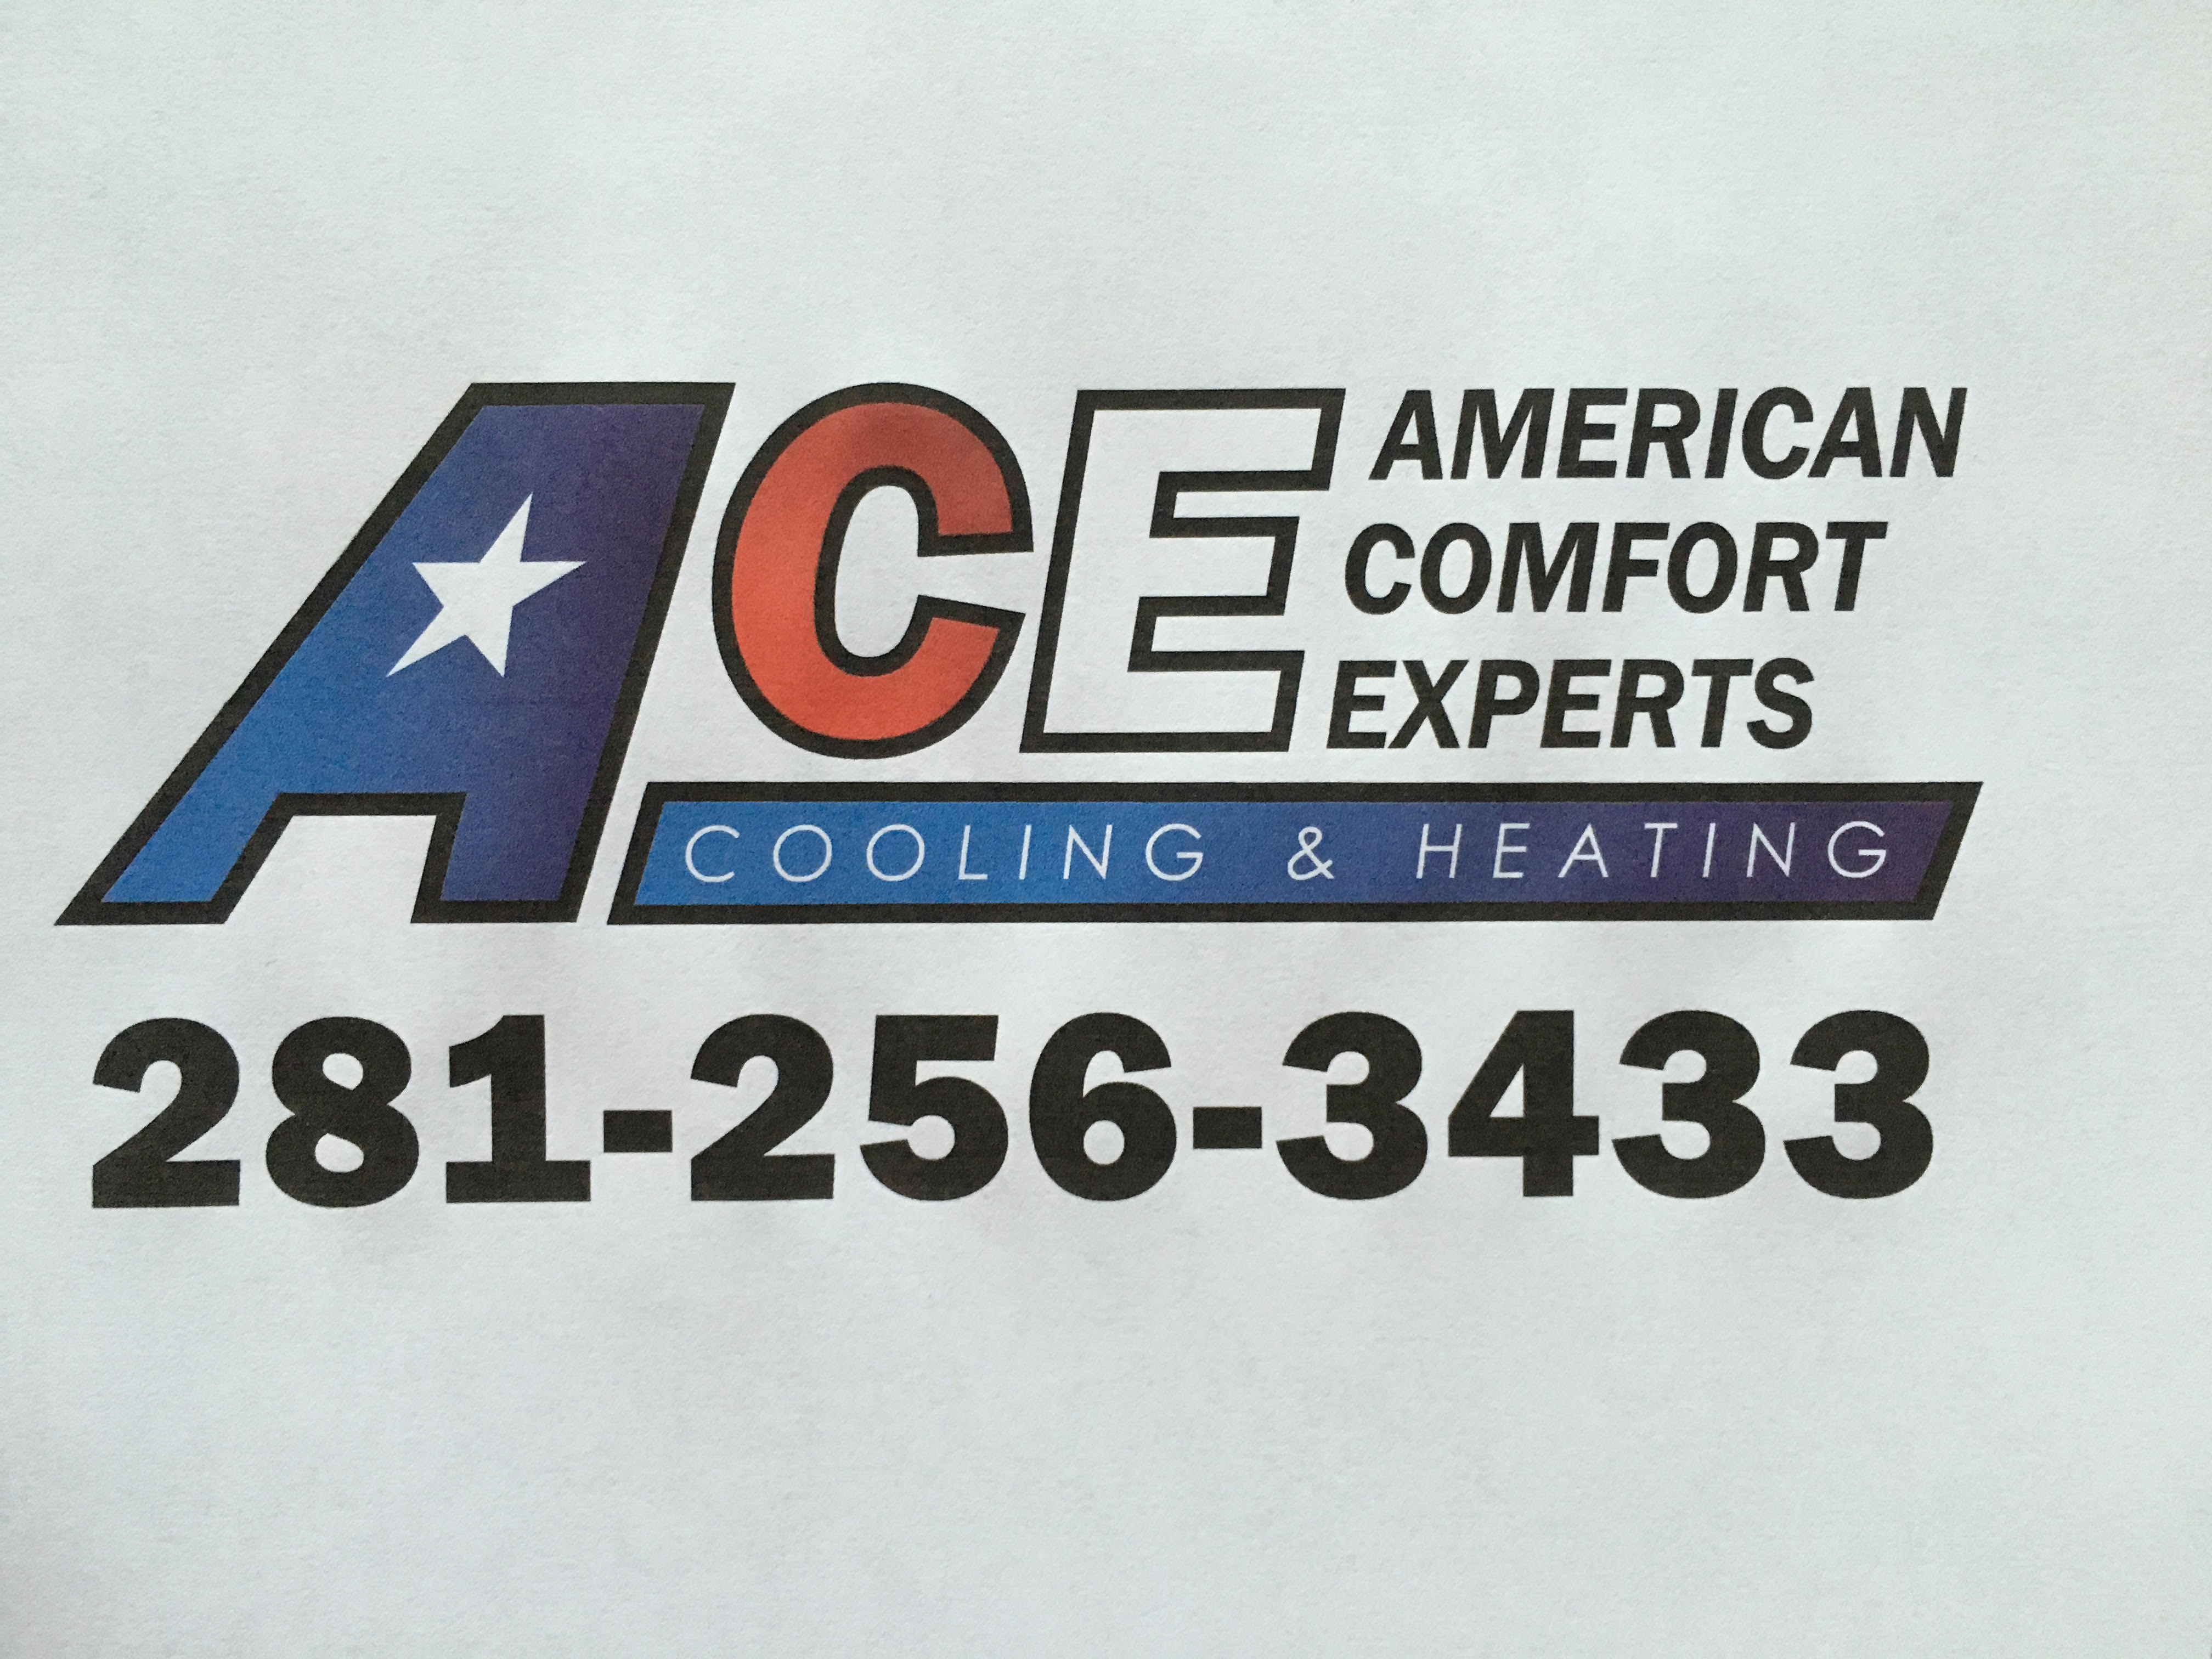 American Comfort Experts Offer Expert Opinions and Services on HVAC Upgrades and Replacements 